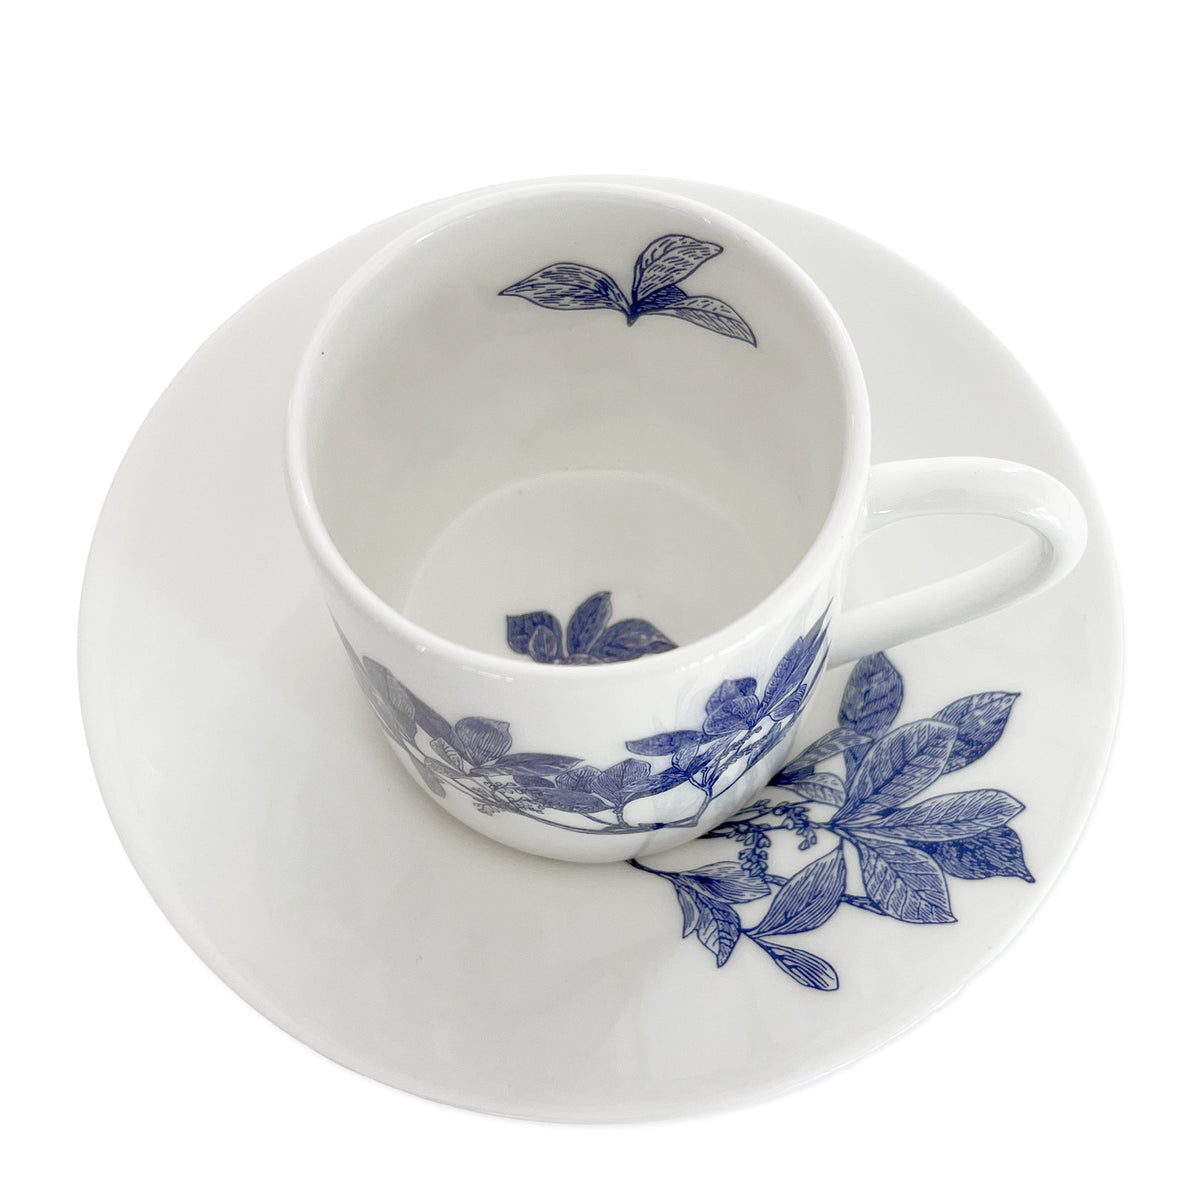 Detail of Arbor Espresso Cup and Saucer in blue and white bone china from Caskata